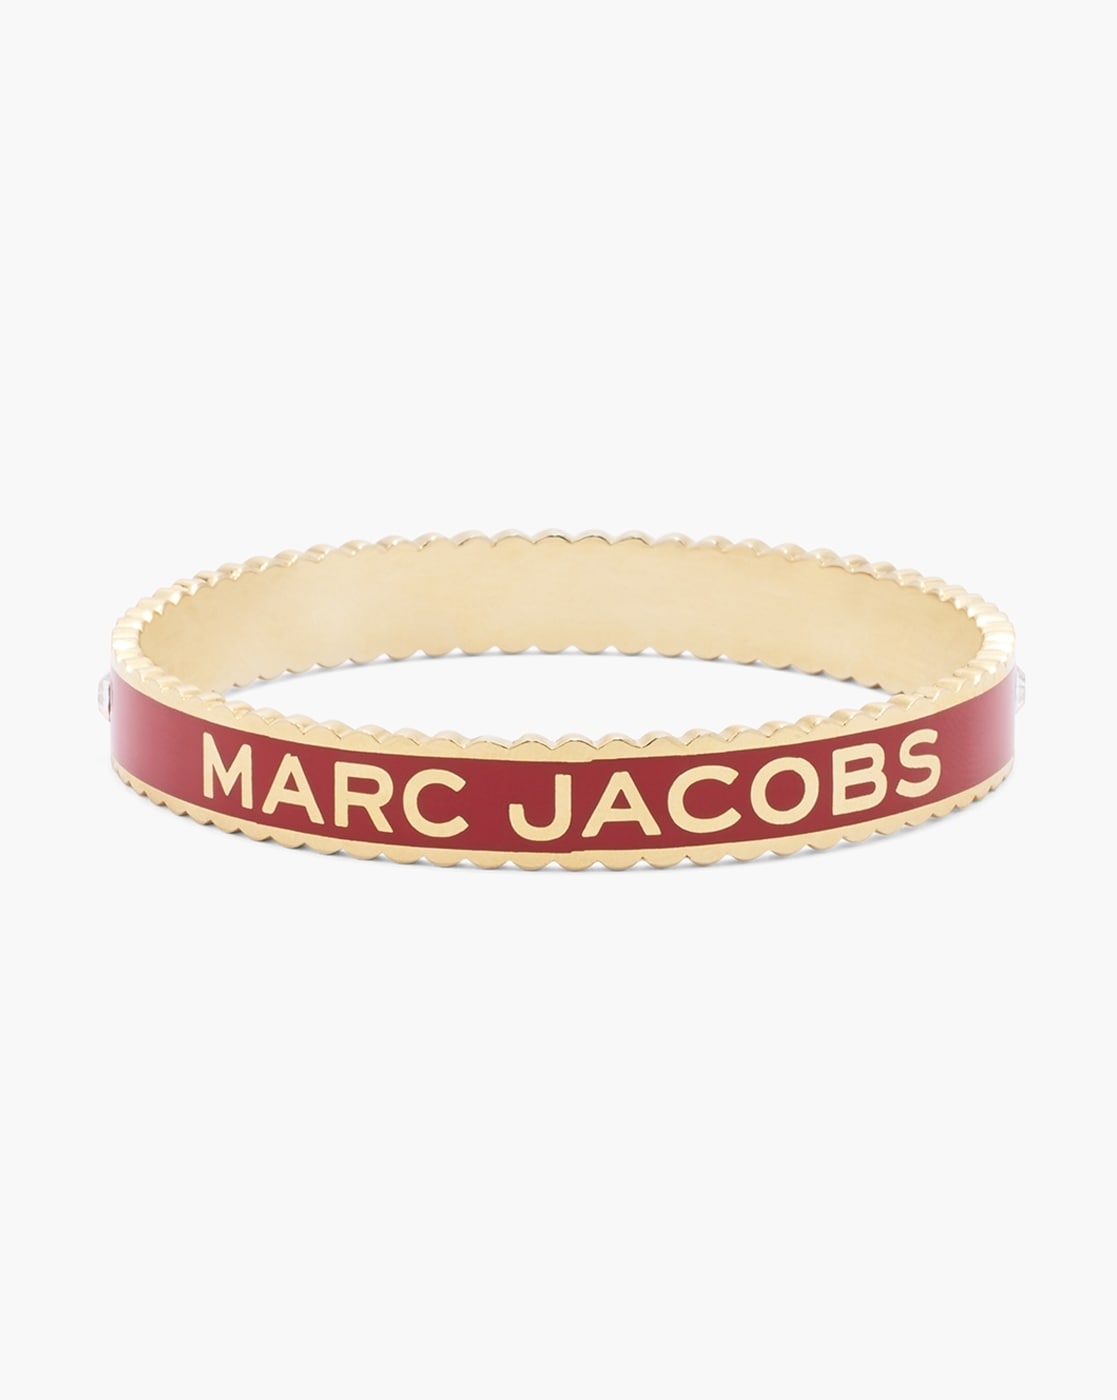 Authentic Marc by Marc Jacobs Acrylic Chunky Bracelet - Etsy